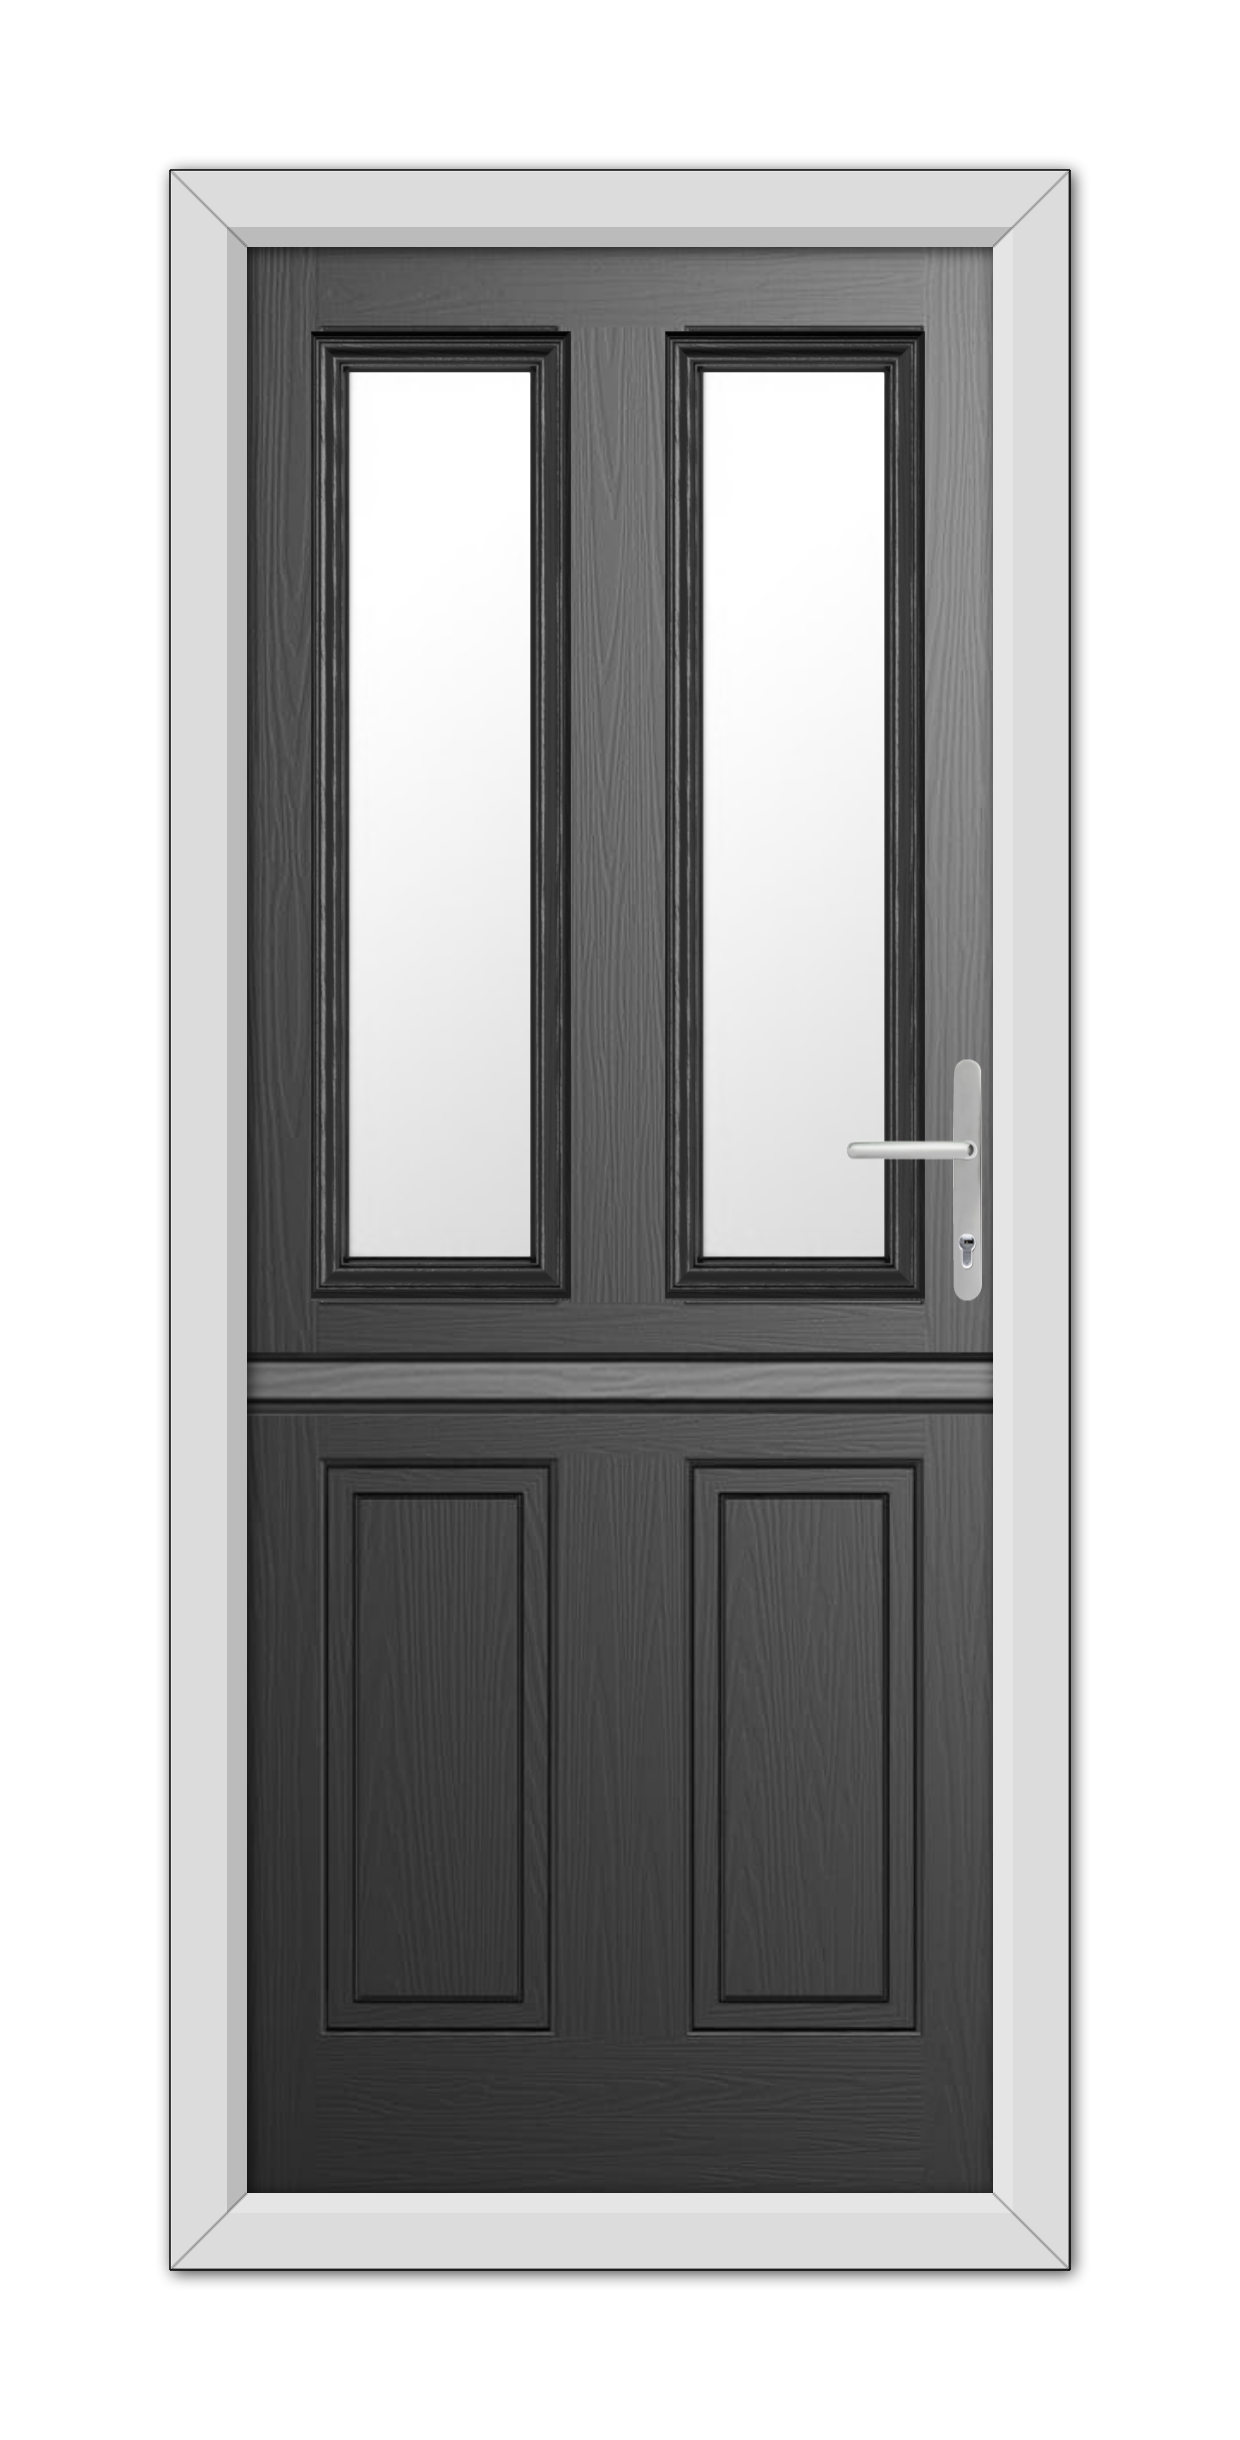 Black Whitmore Stable Composite Door 48mm Timber Core with a dark wood finish and white frame, featuring rectangular glass windows and a modern handle on the right side.